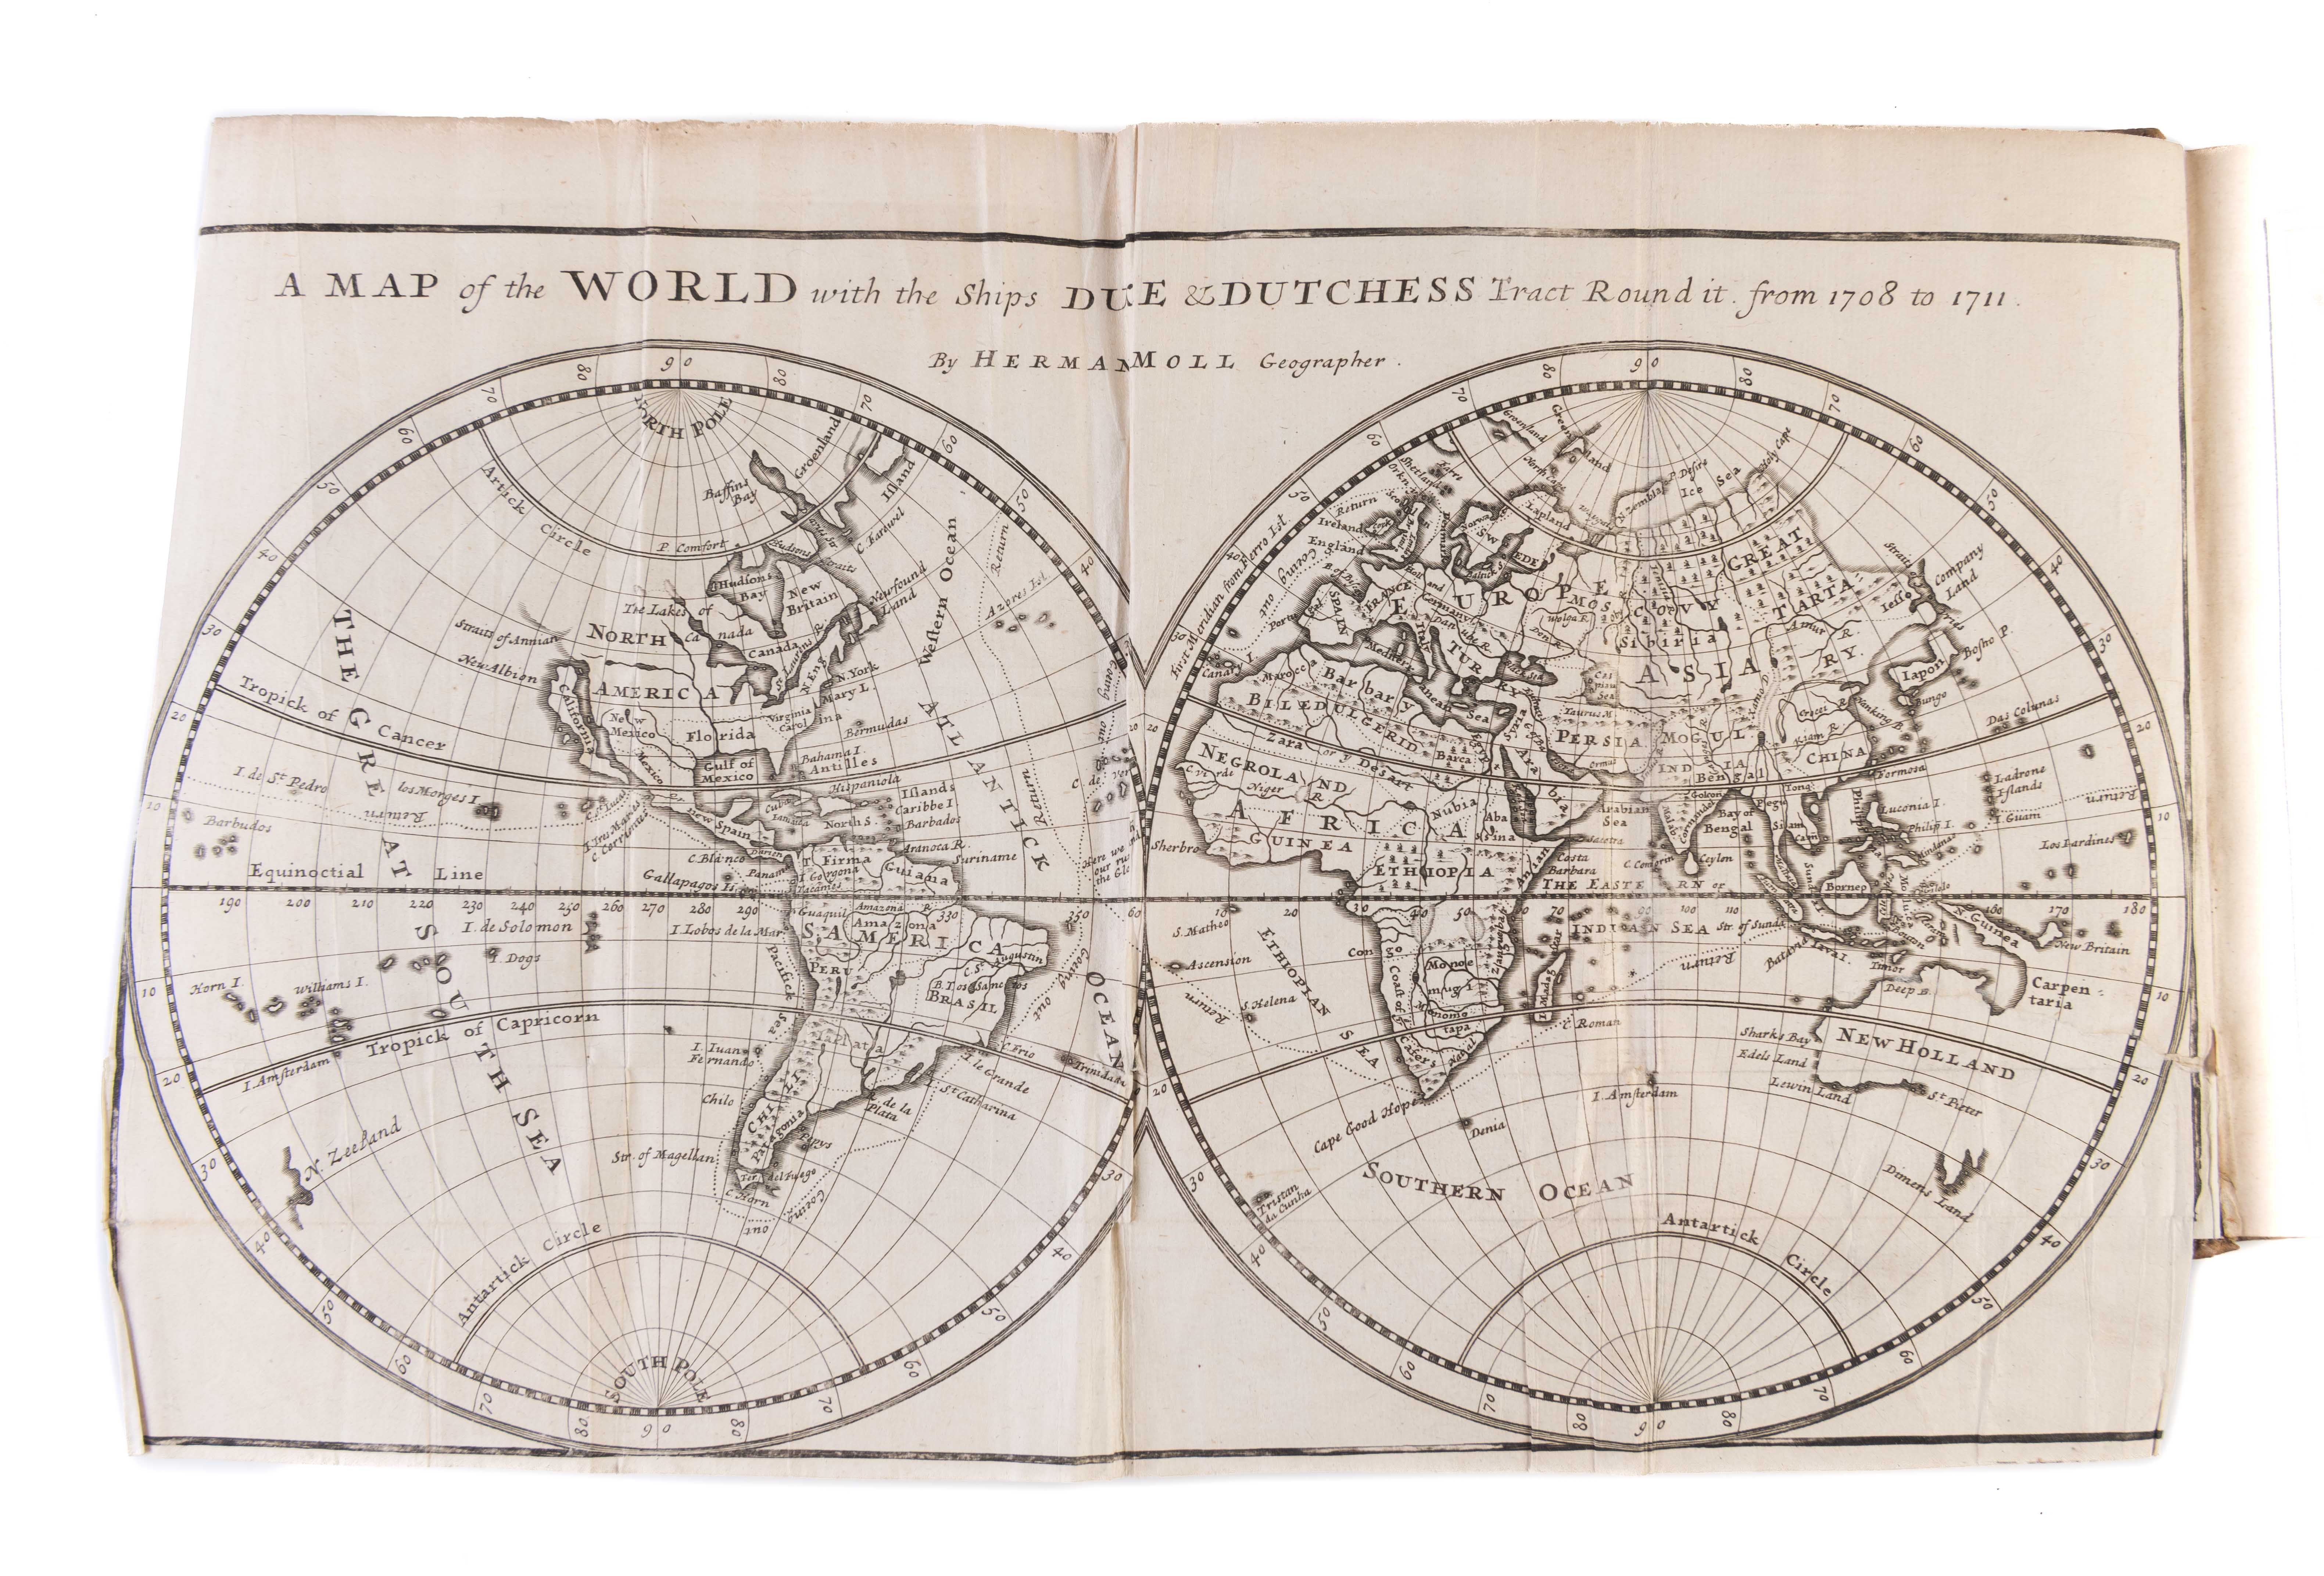 A Cruising Voyage Round the World by ROGERS Woodes: (1712) | Maggs Bros ...